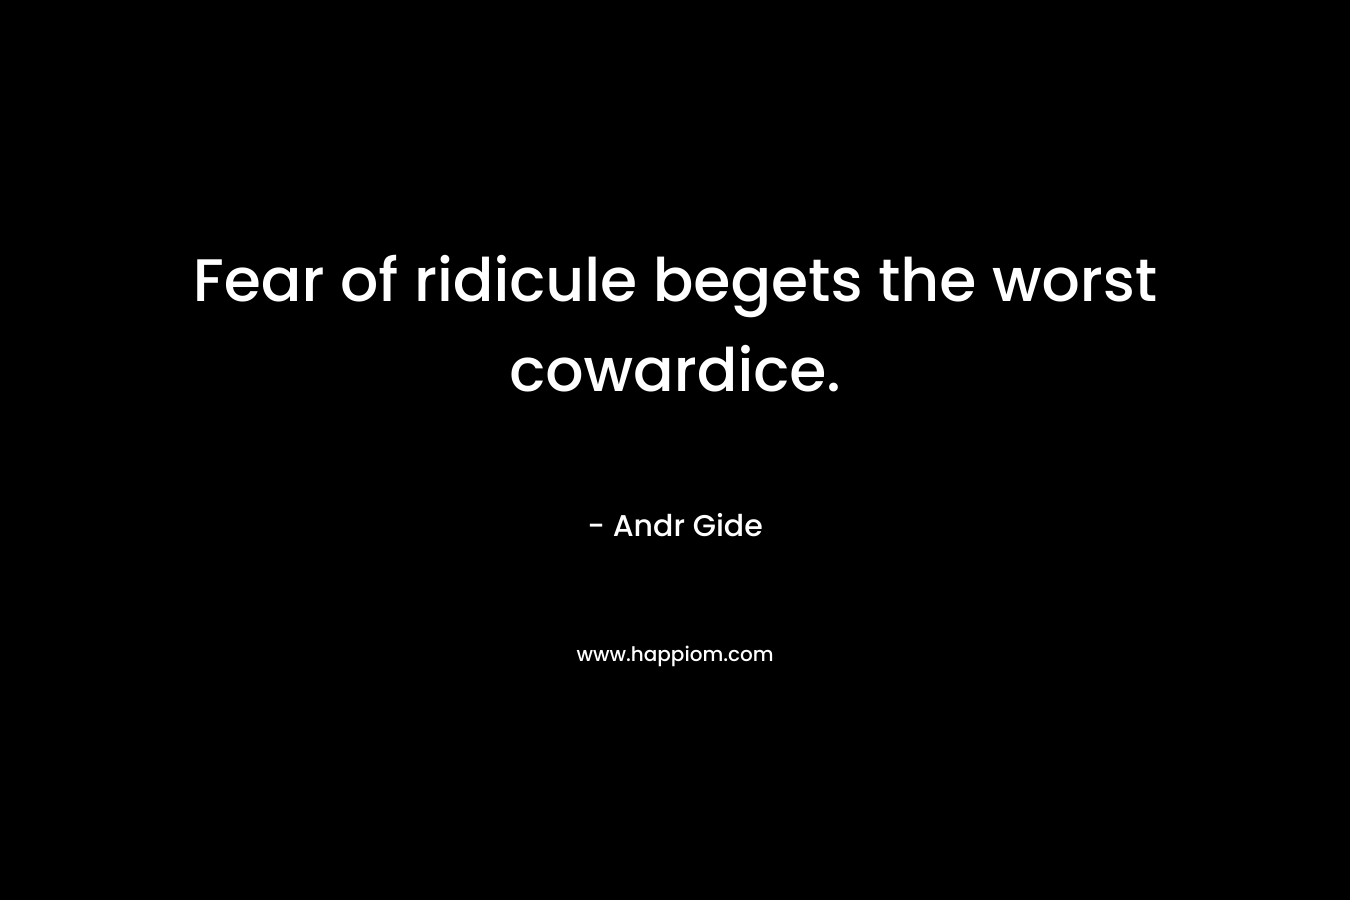 Fear of ridicule begets the worst cowardice. – Andr Gide